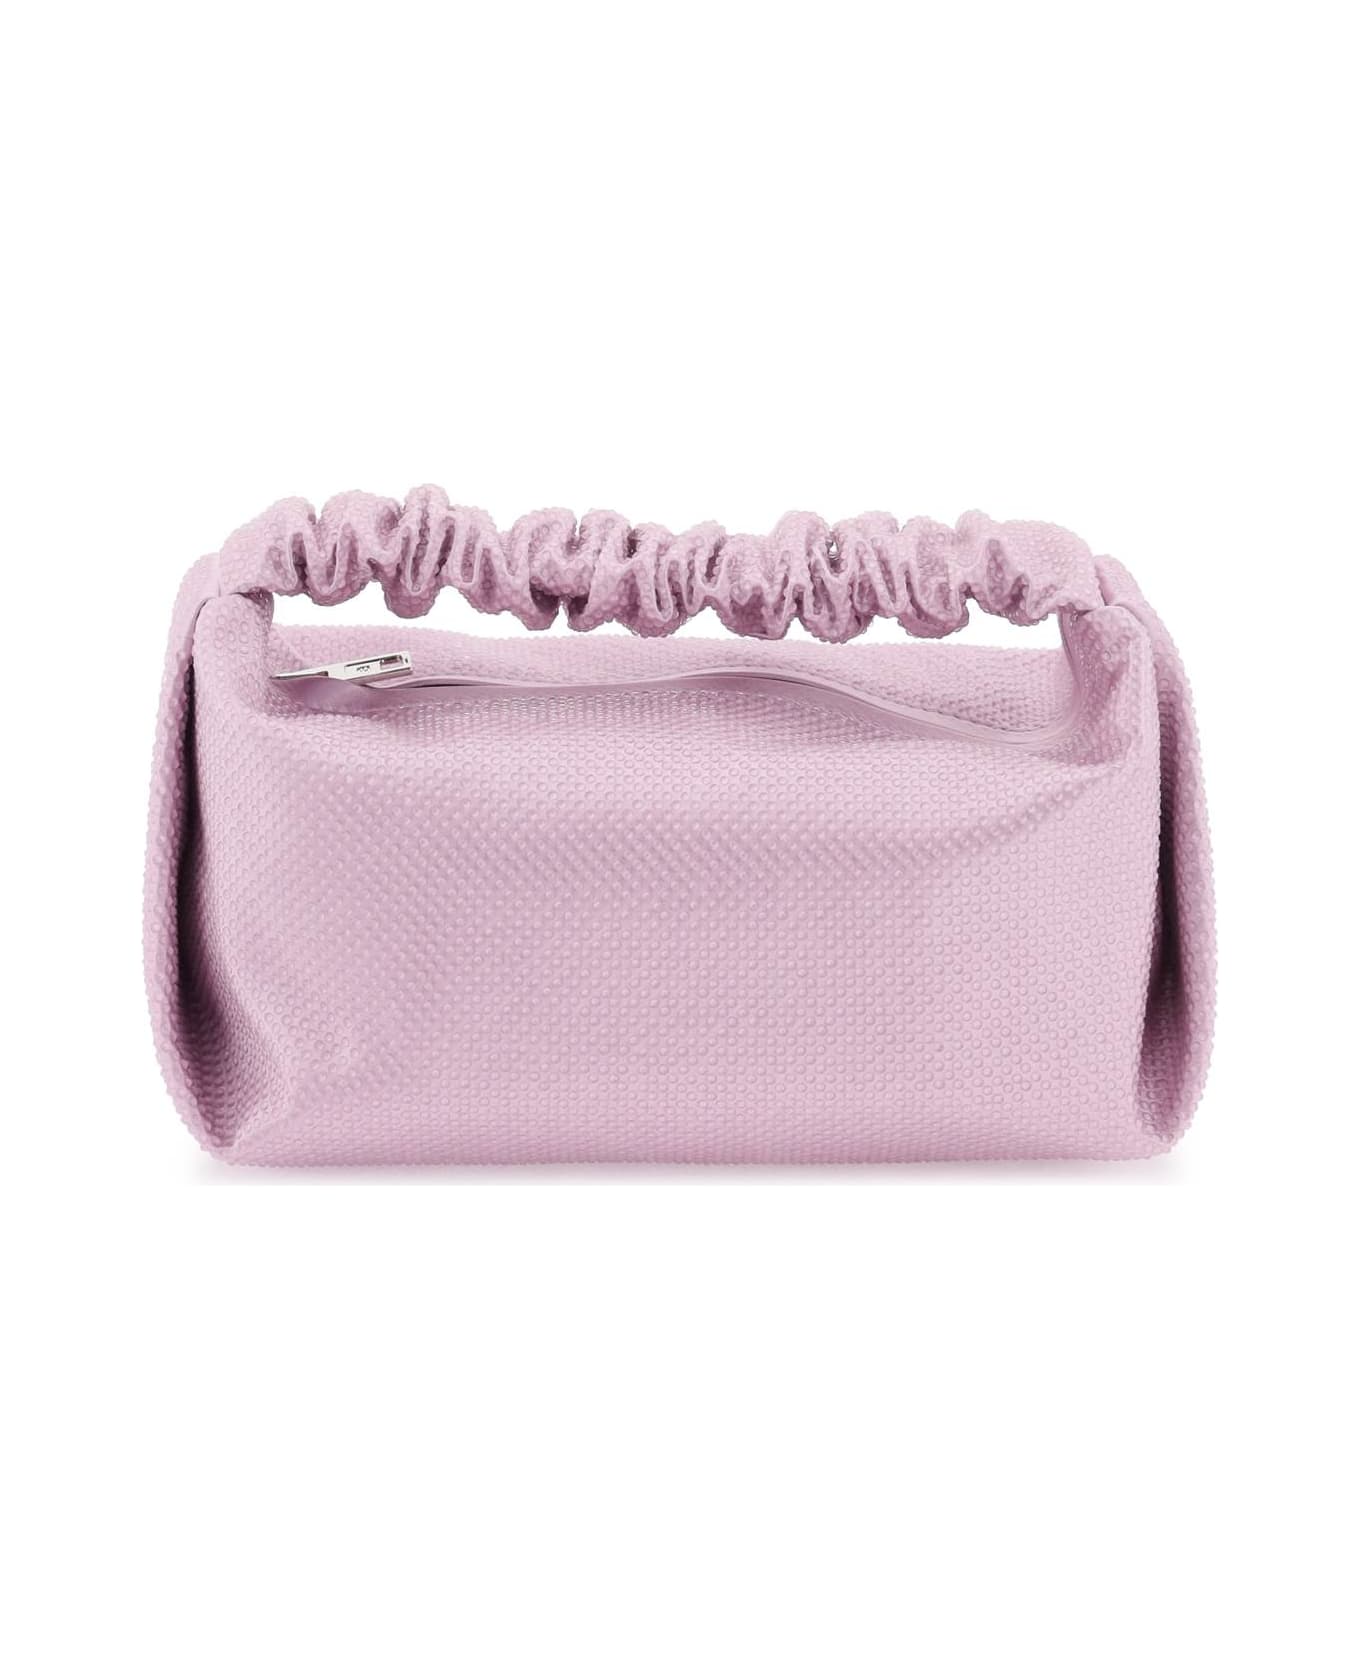 Alexander Wang Scrunchie Mini Bag With Crystals - Winsome Orchid